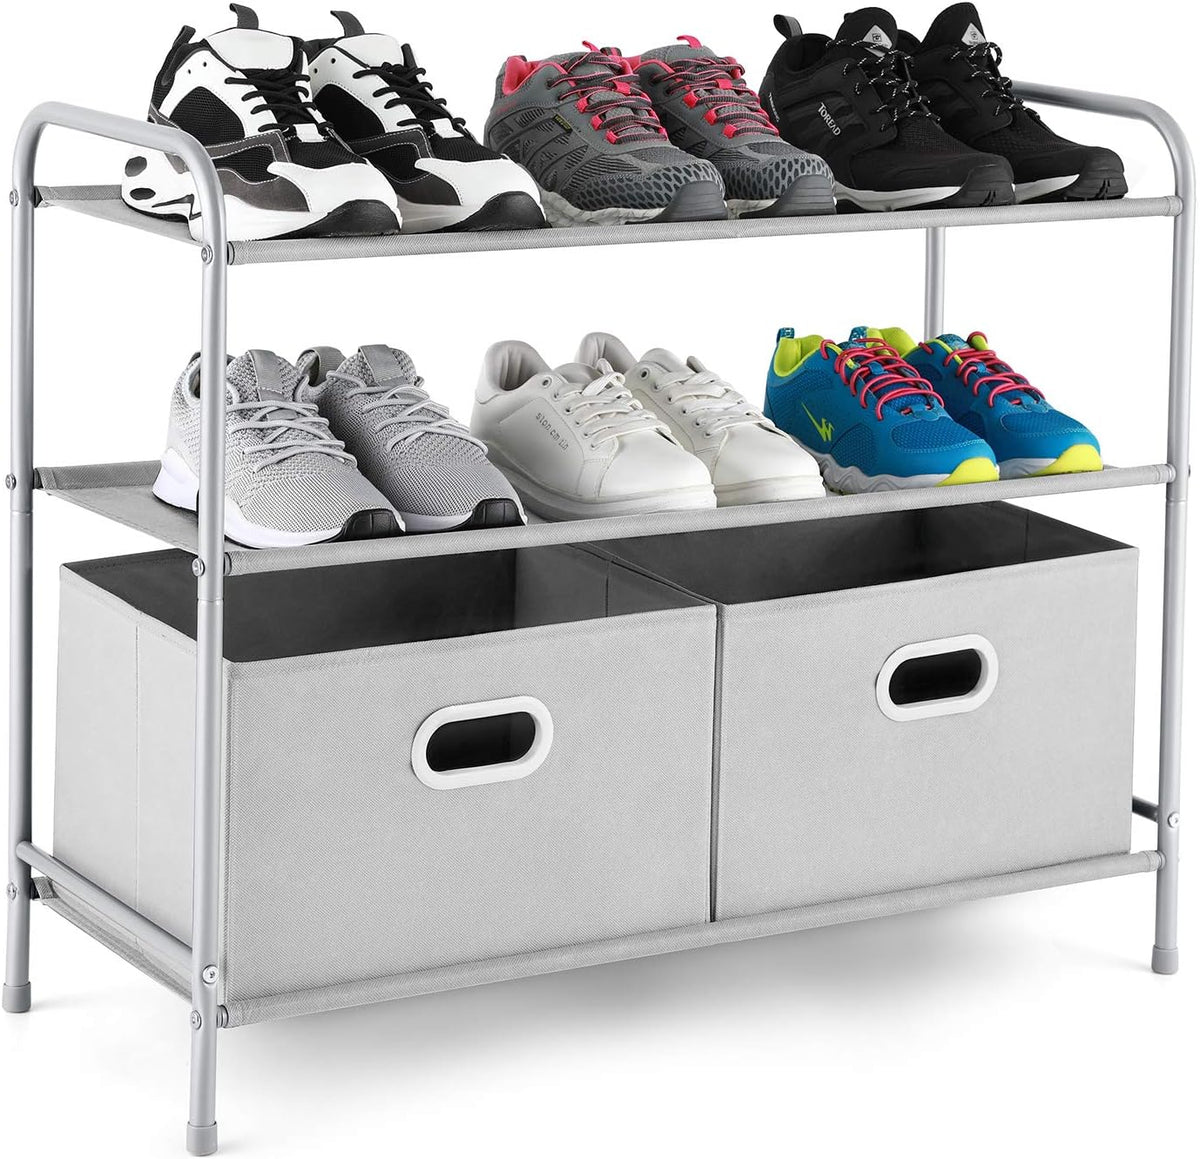 3 Tiers Closet Shelf Organizer with 2 Drawers for Home Storage and Organization, Silver Grey